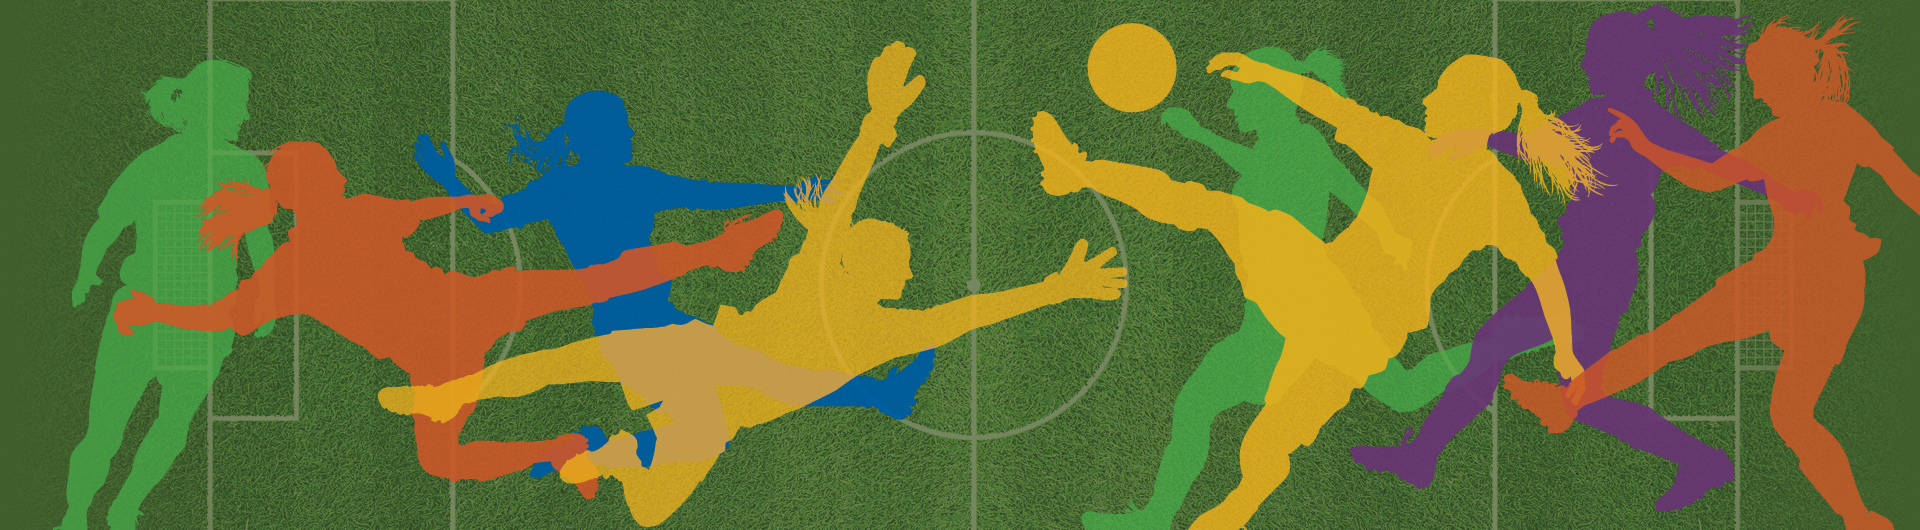 Bright colored soccer player silhouettes on a green background